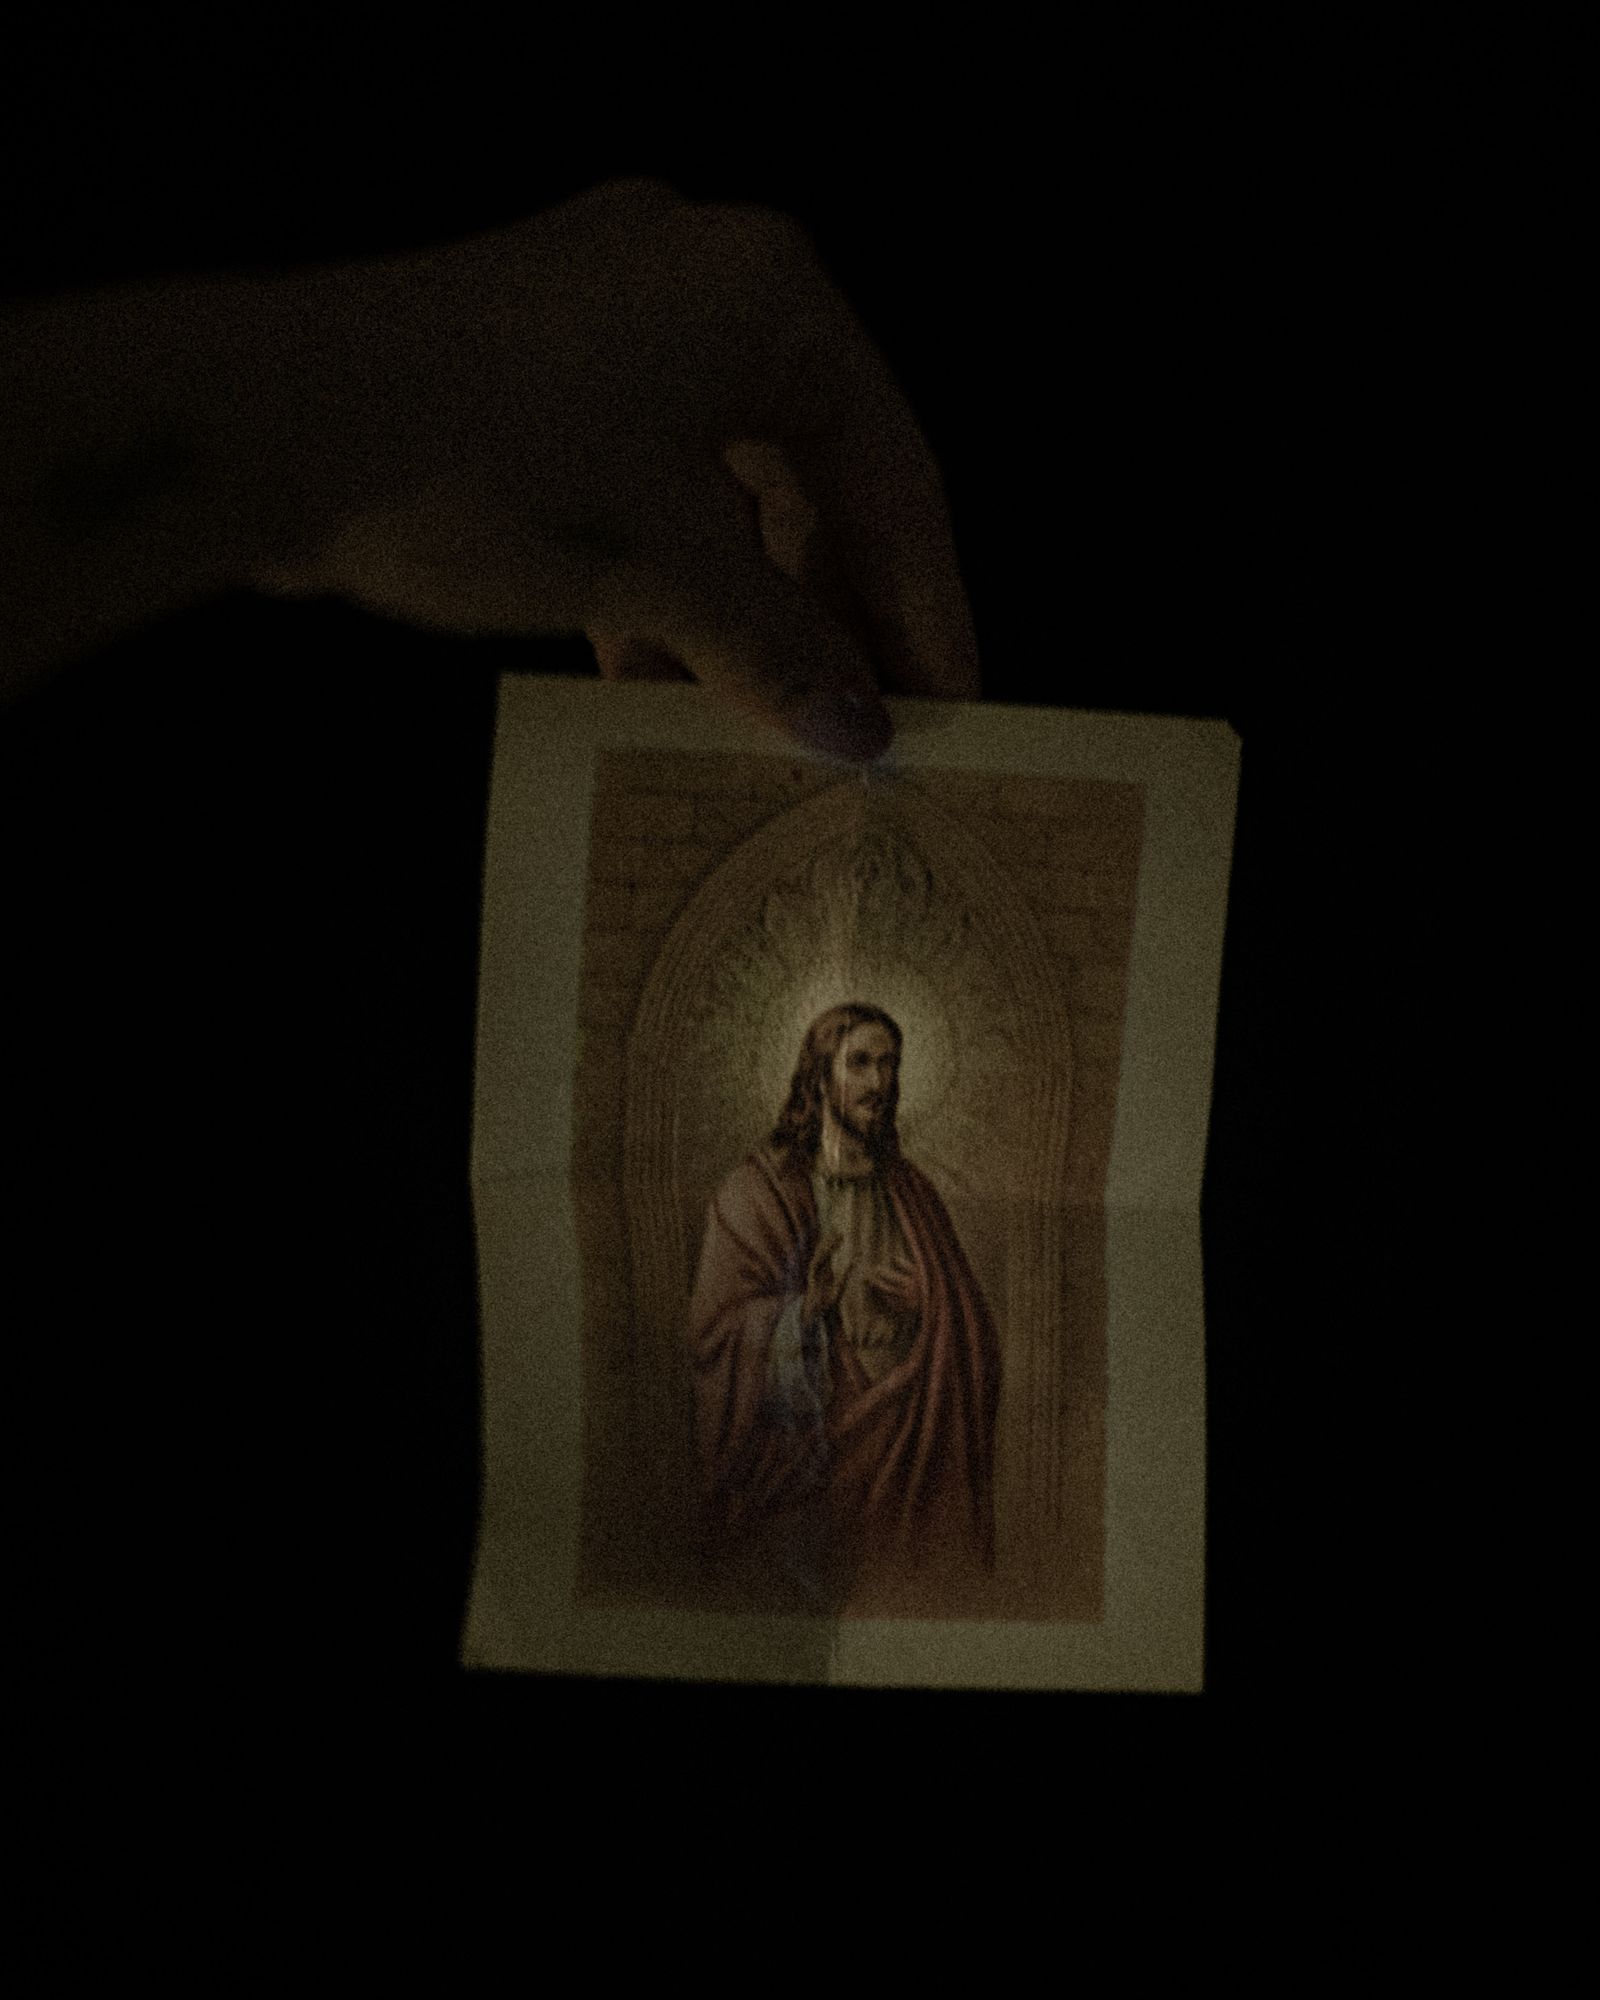 © Chloe Sharrock - Leaflet representing Jesus Christ, distributed in a church in Baghdad.